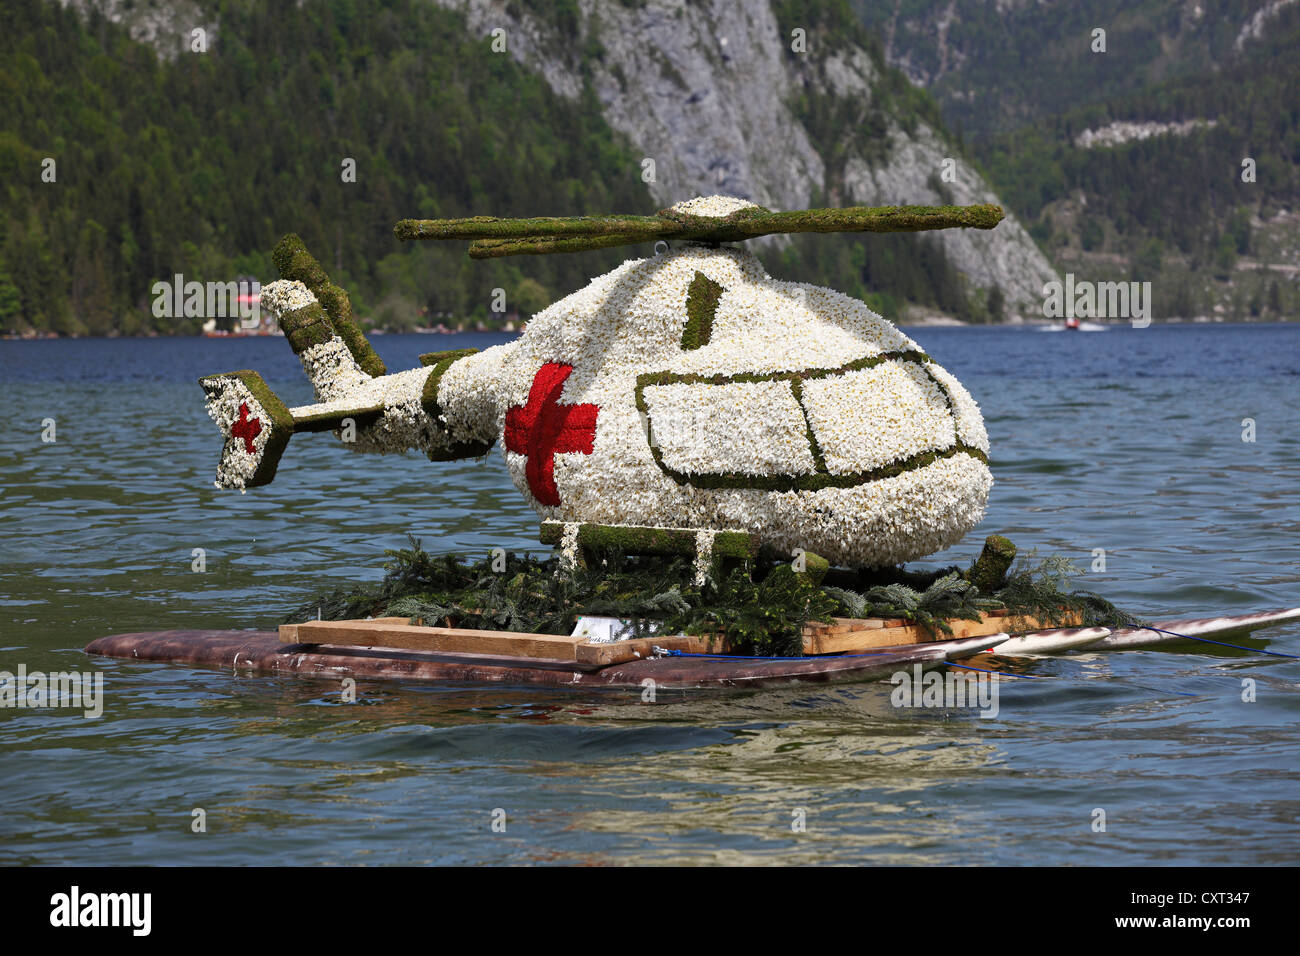 Helicopter made of daffodils by the Red Cross youth club, boat parade on lake Altausseer See, Daffodil Festival Stock Photo